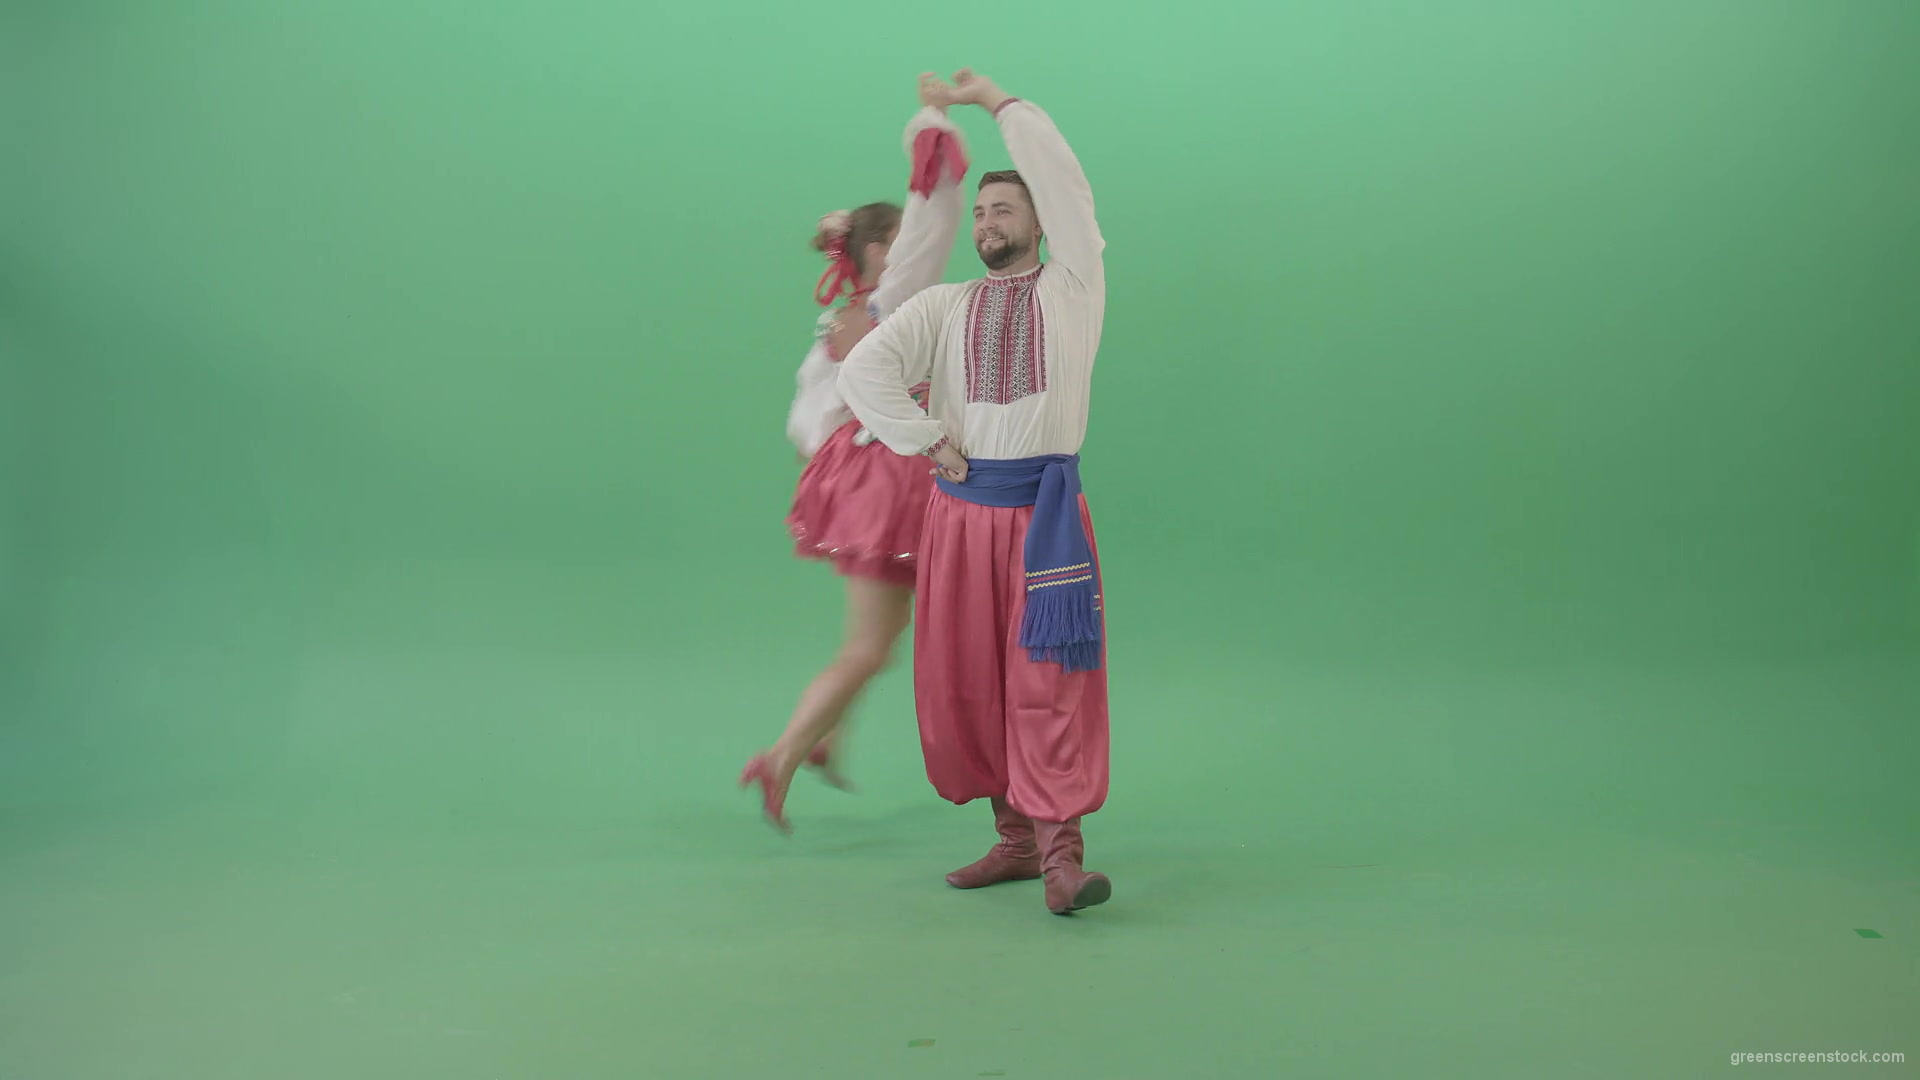 Folk-ethno-ukraine-dancing-boy-and-girl-isolated-on-green-screen-30-fps-4K-Video-Footage-1920_007 Green Screen Stock